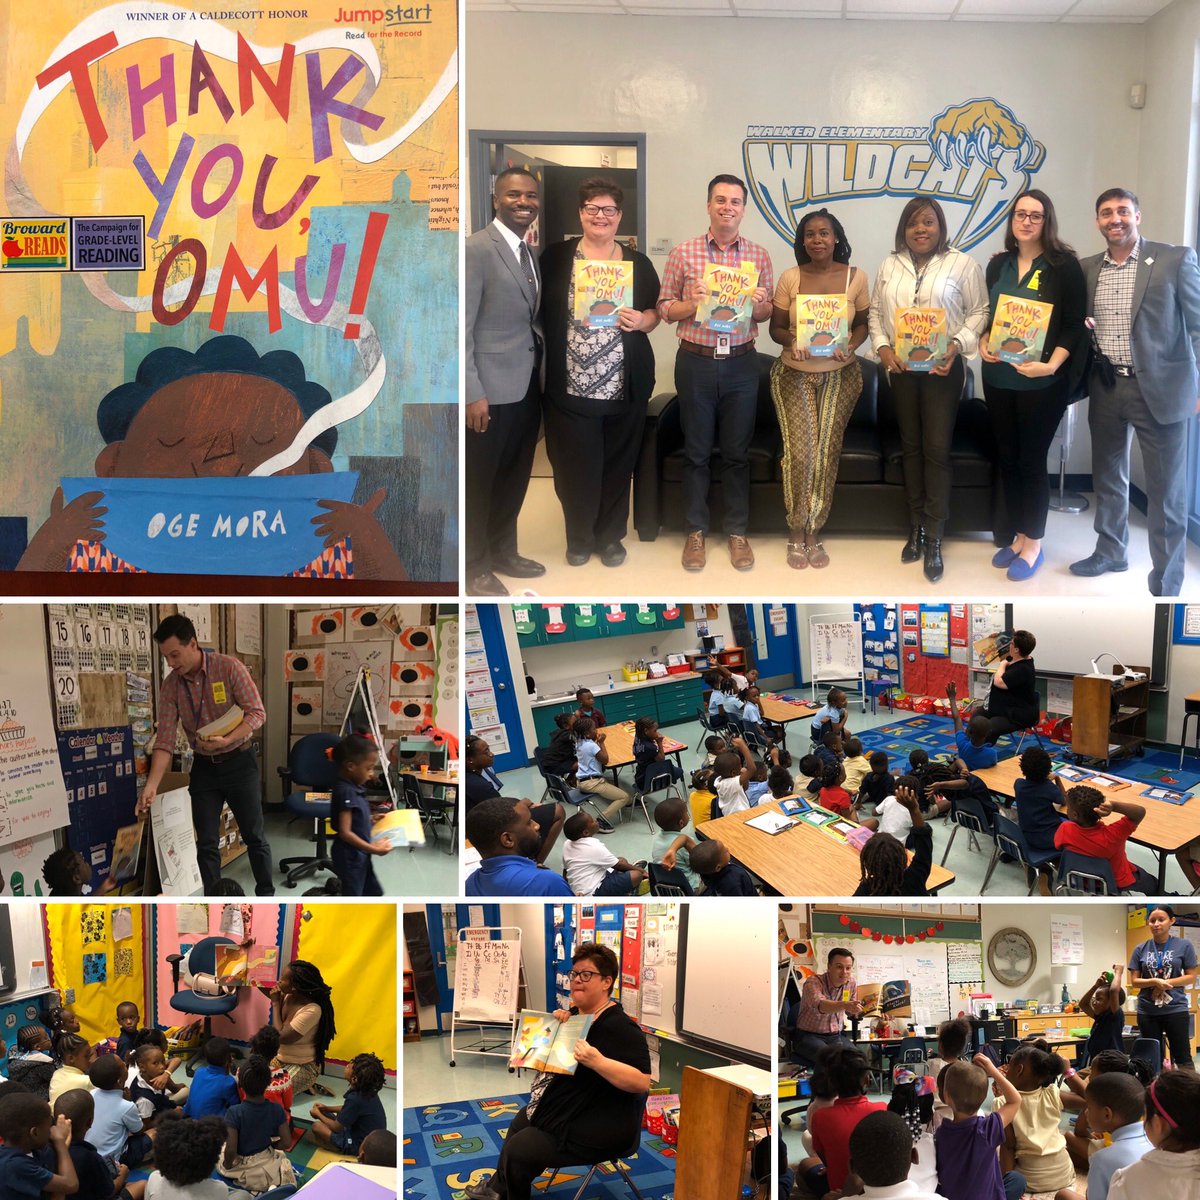 Thank you to all of our wonderful volunteers who participated in the annual #readfortherecord day as guest readers. #wineverymoment #wildcatstrong🐾 #walkerpride #littlebrownbook #thankyouomu